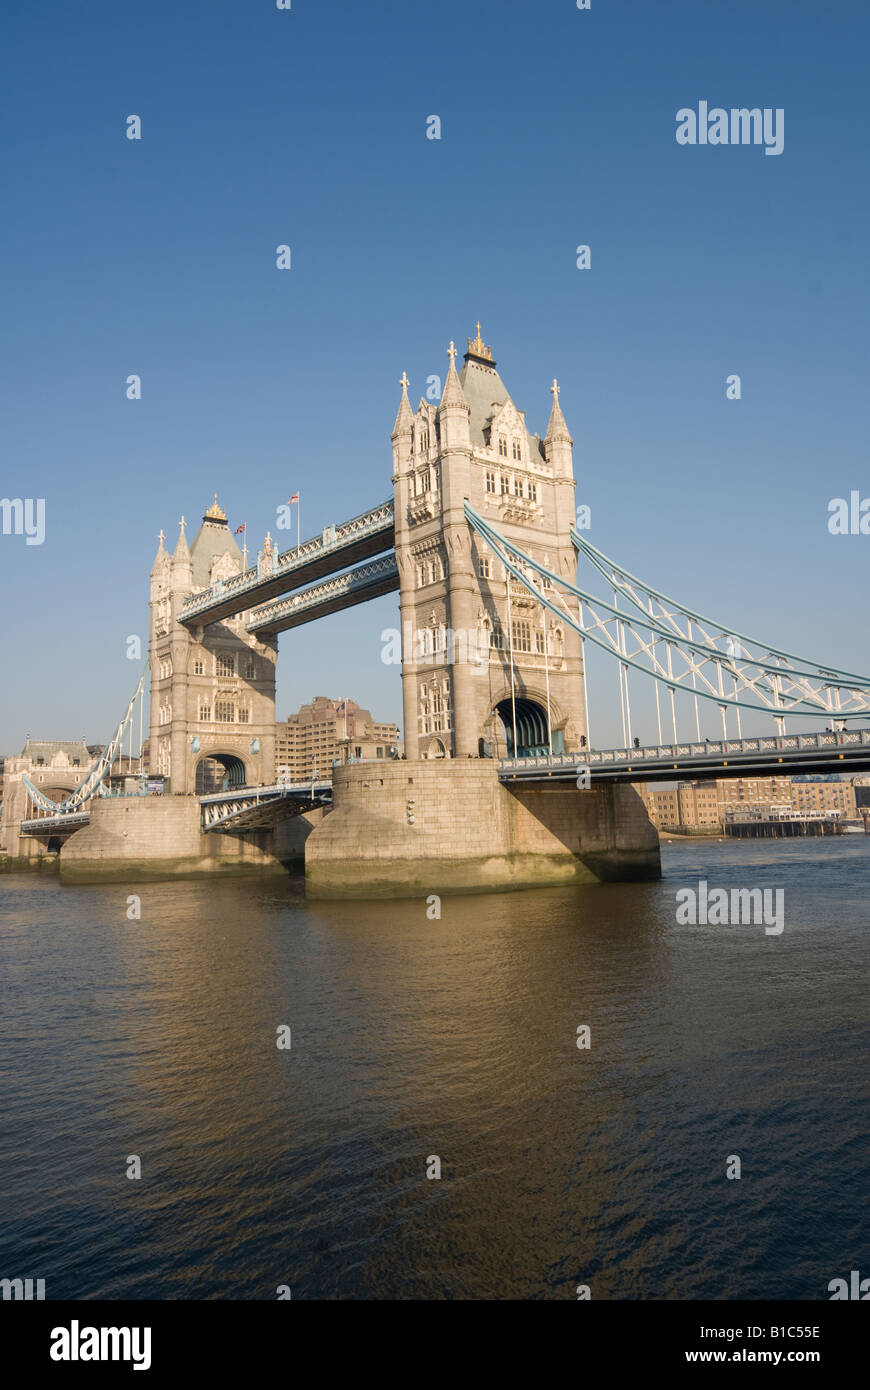 Tower Bridge over the River Thames in the capital city of London, England. Stock Photo